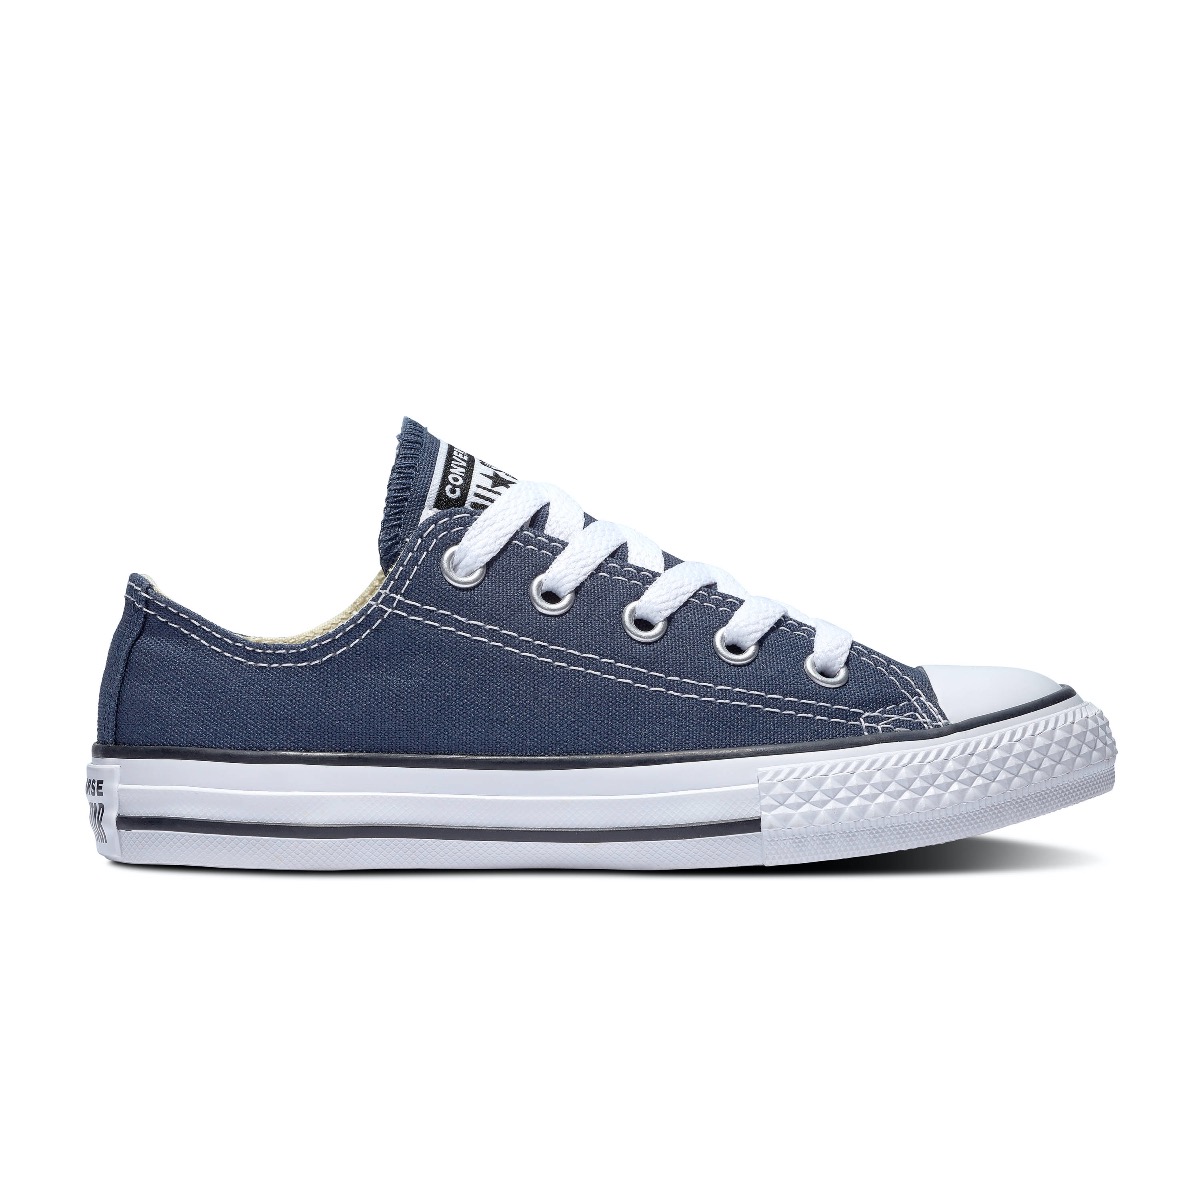 Converse Chuck Taylor All Star donkerblauw